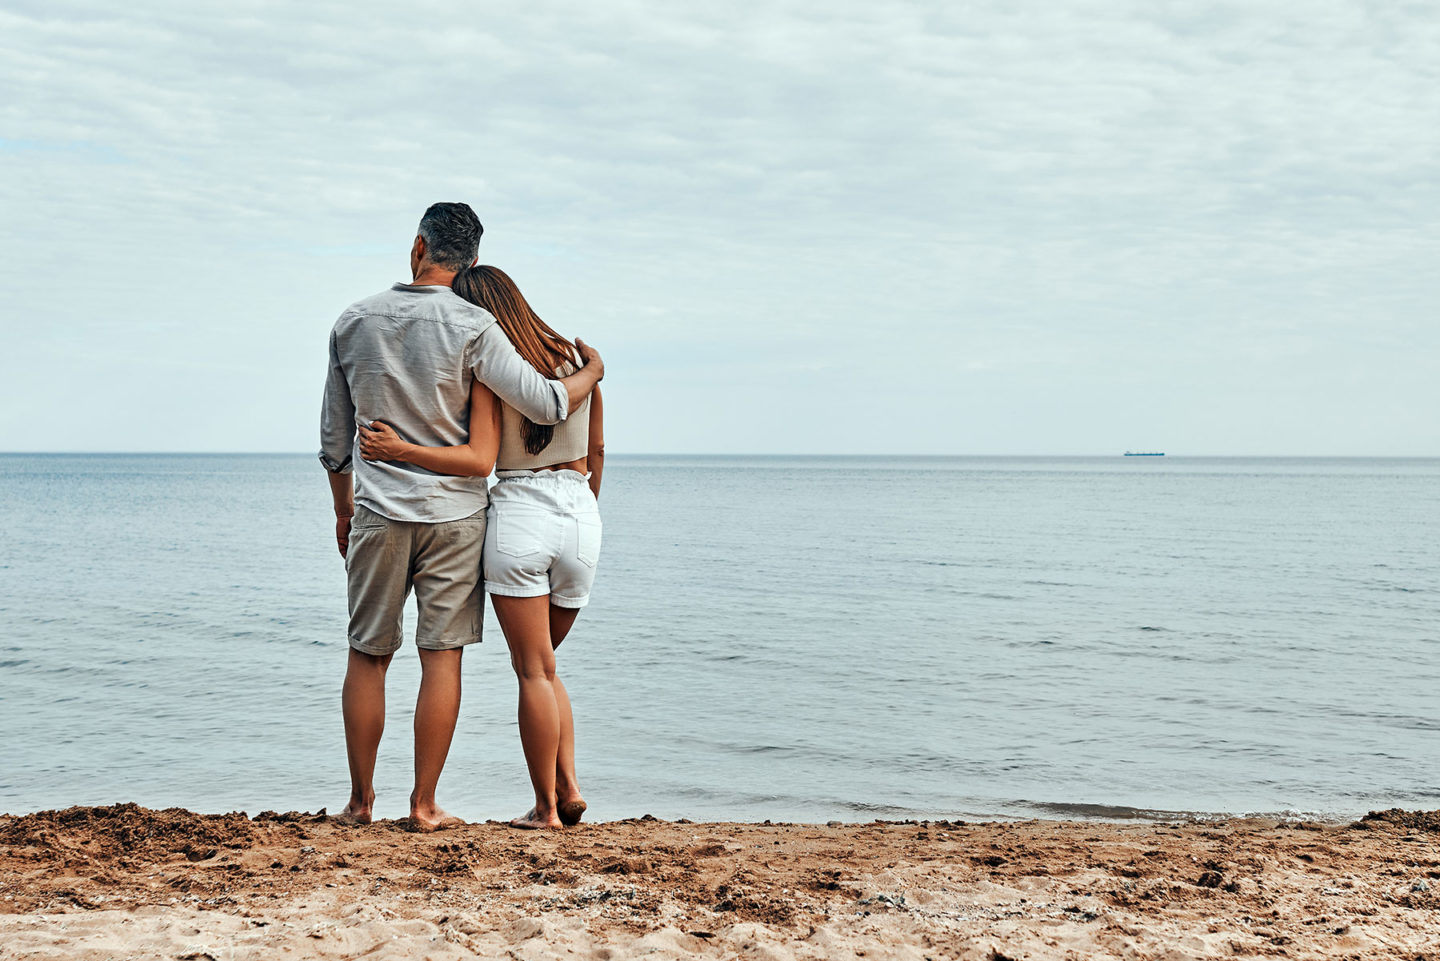 Couple with arms around each other on beach